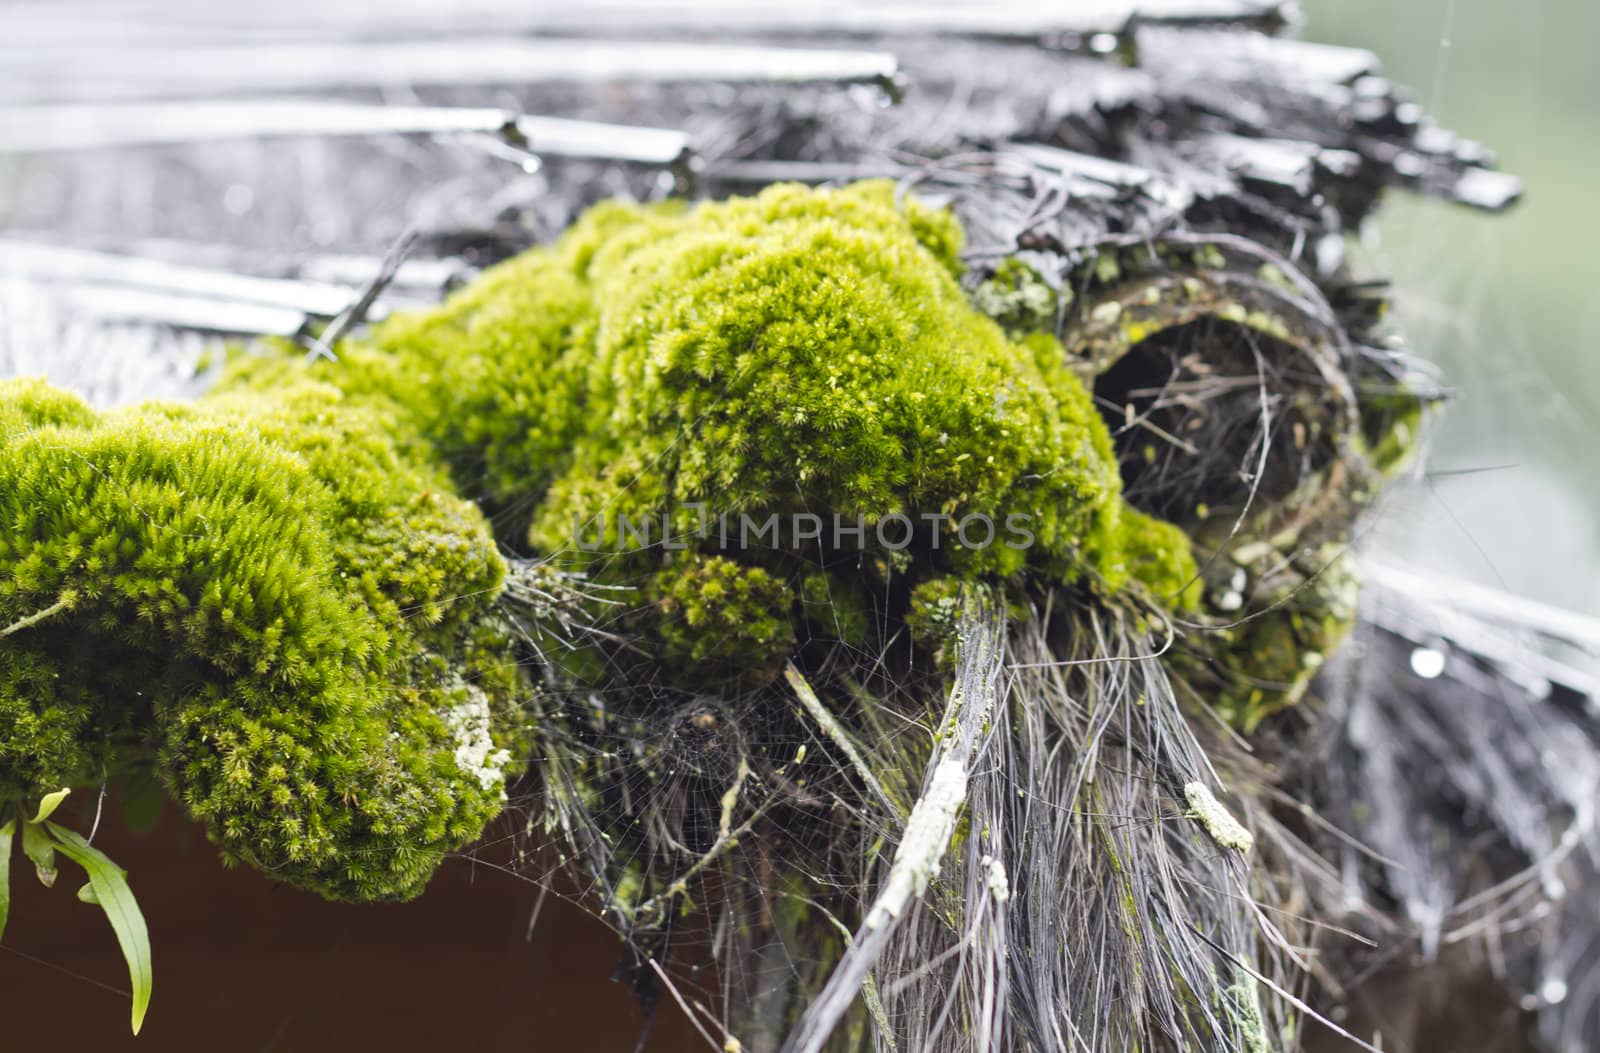 close up view of the green moss grew on straw roofing material of a traditional hut